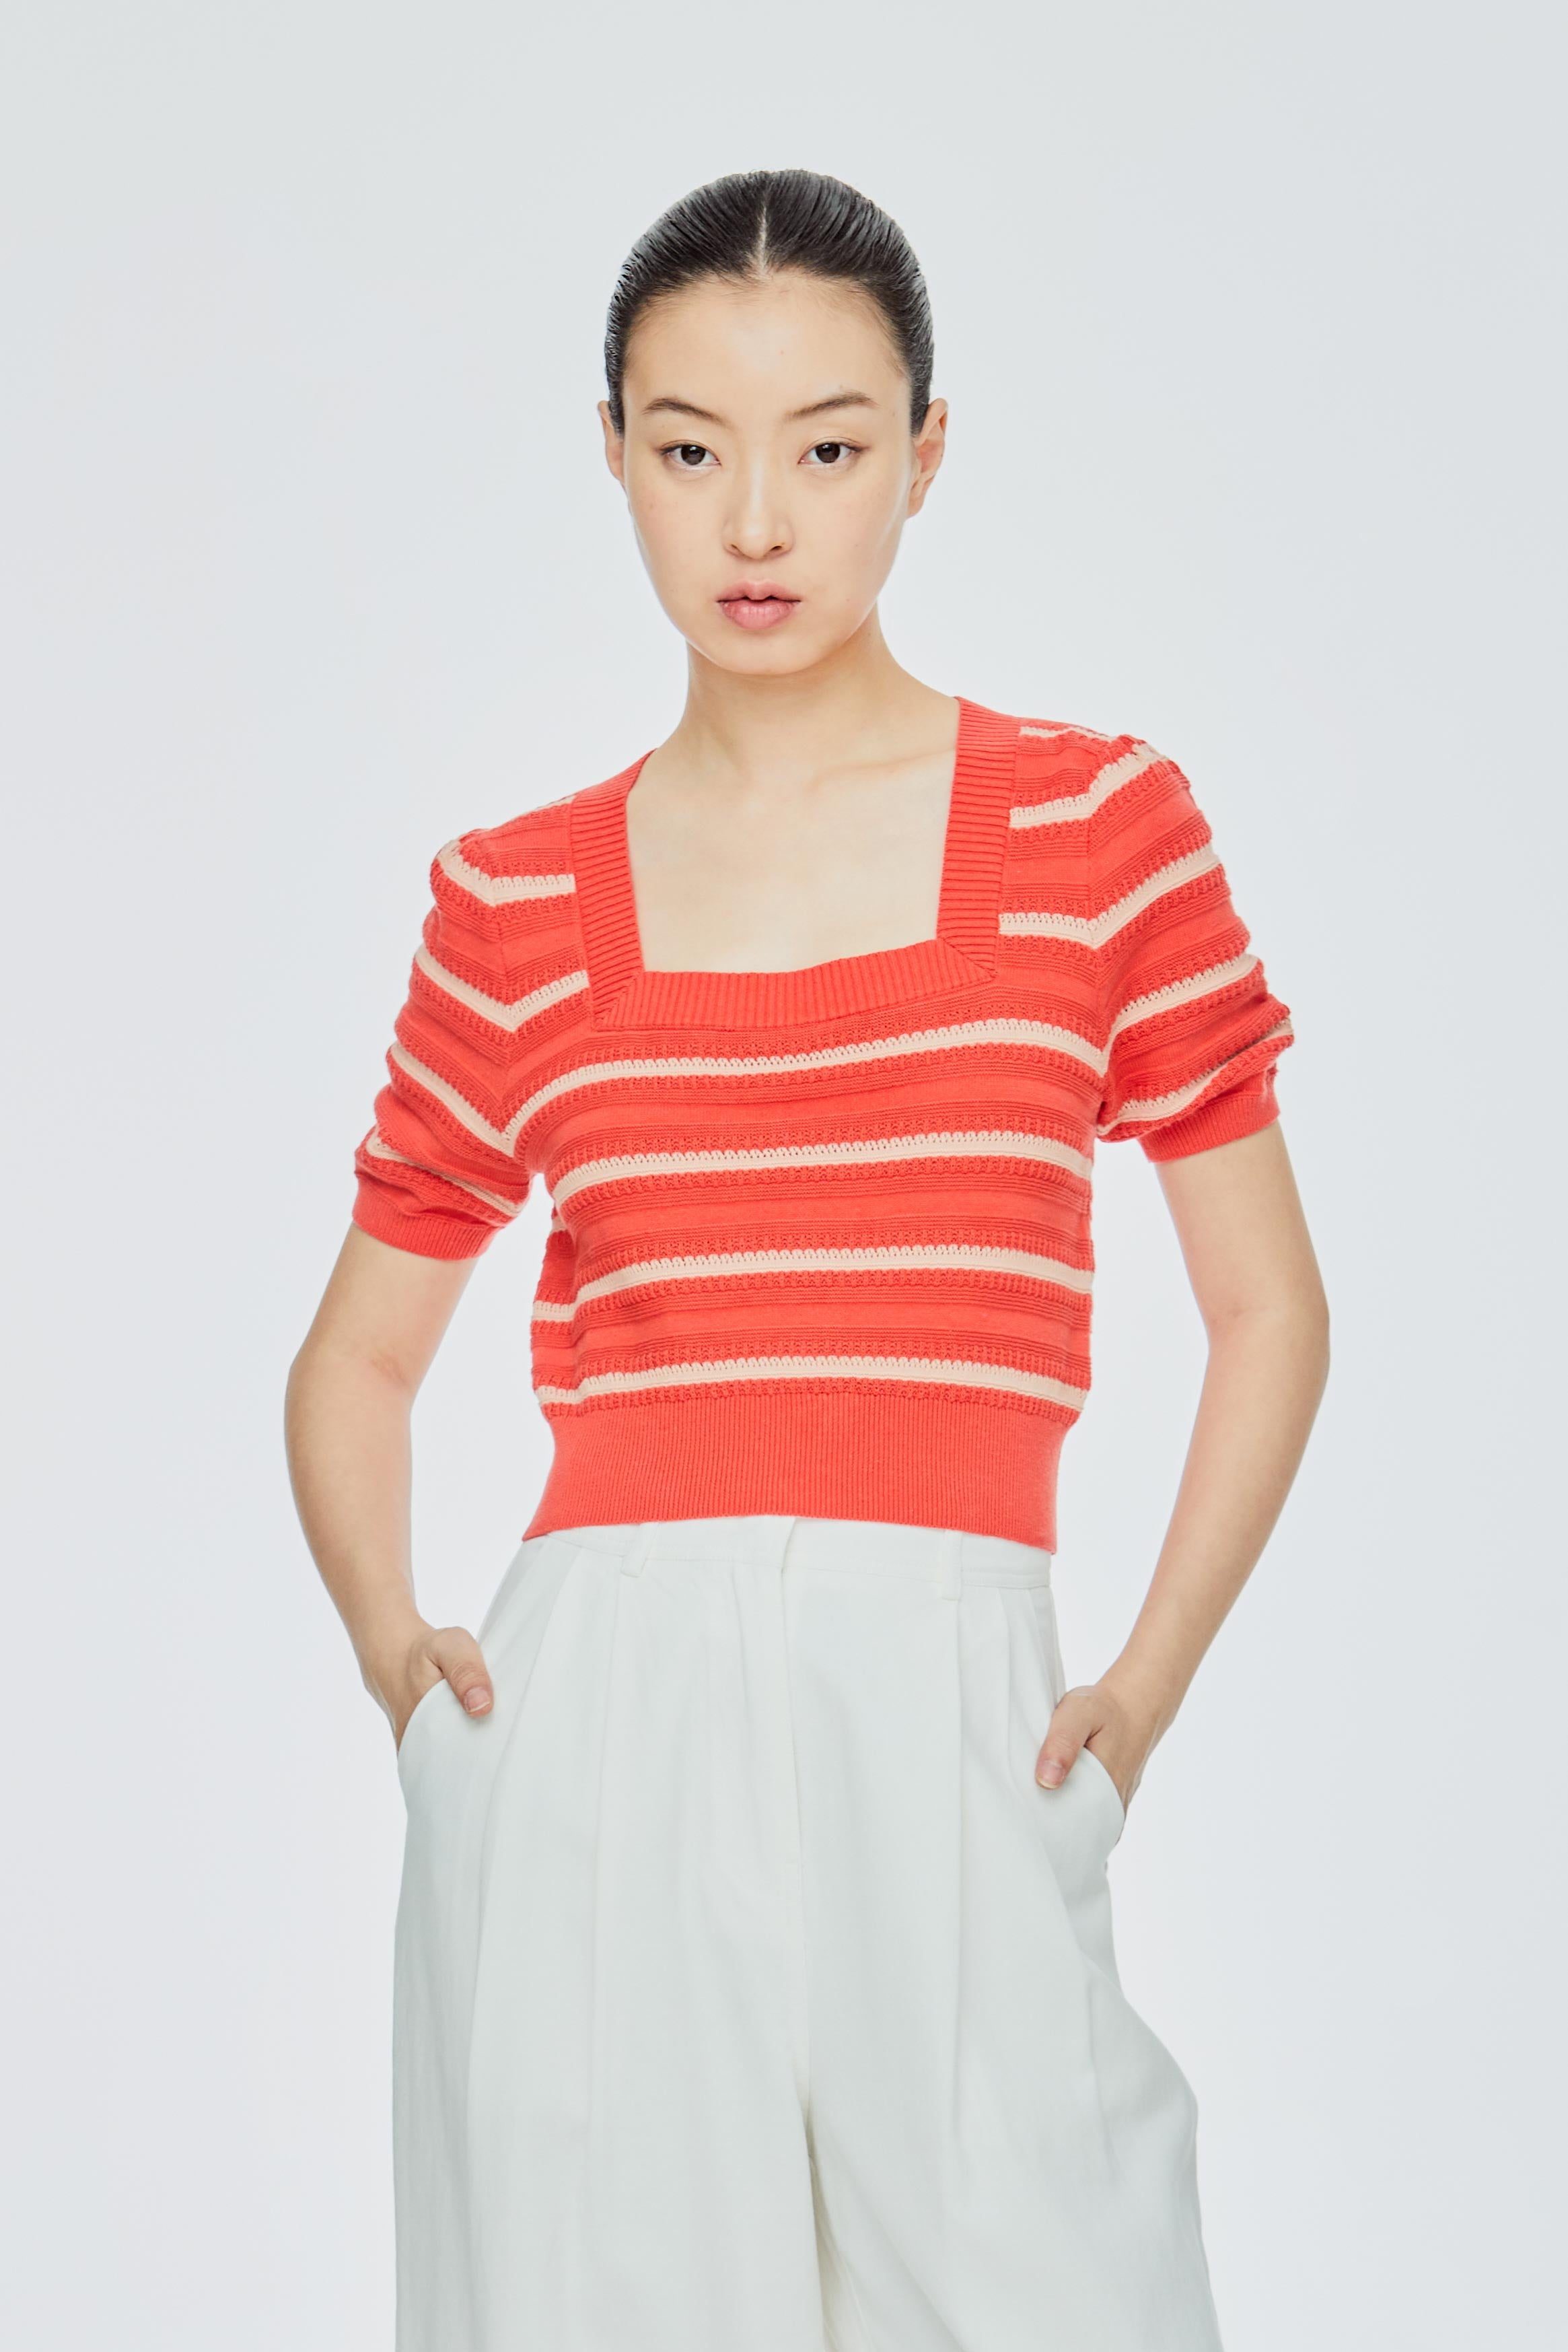 Knitted Horizontal Stripes Crop Top